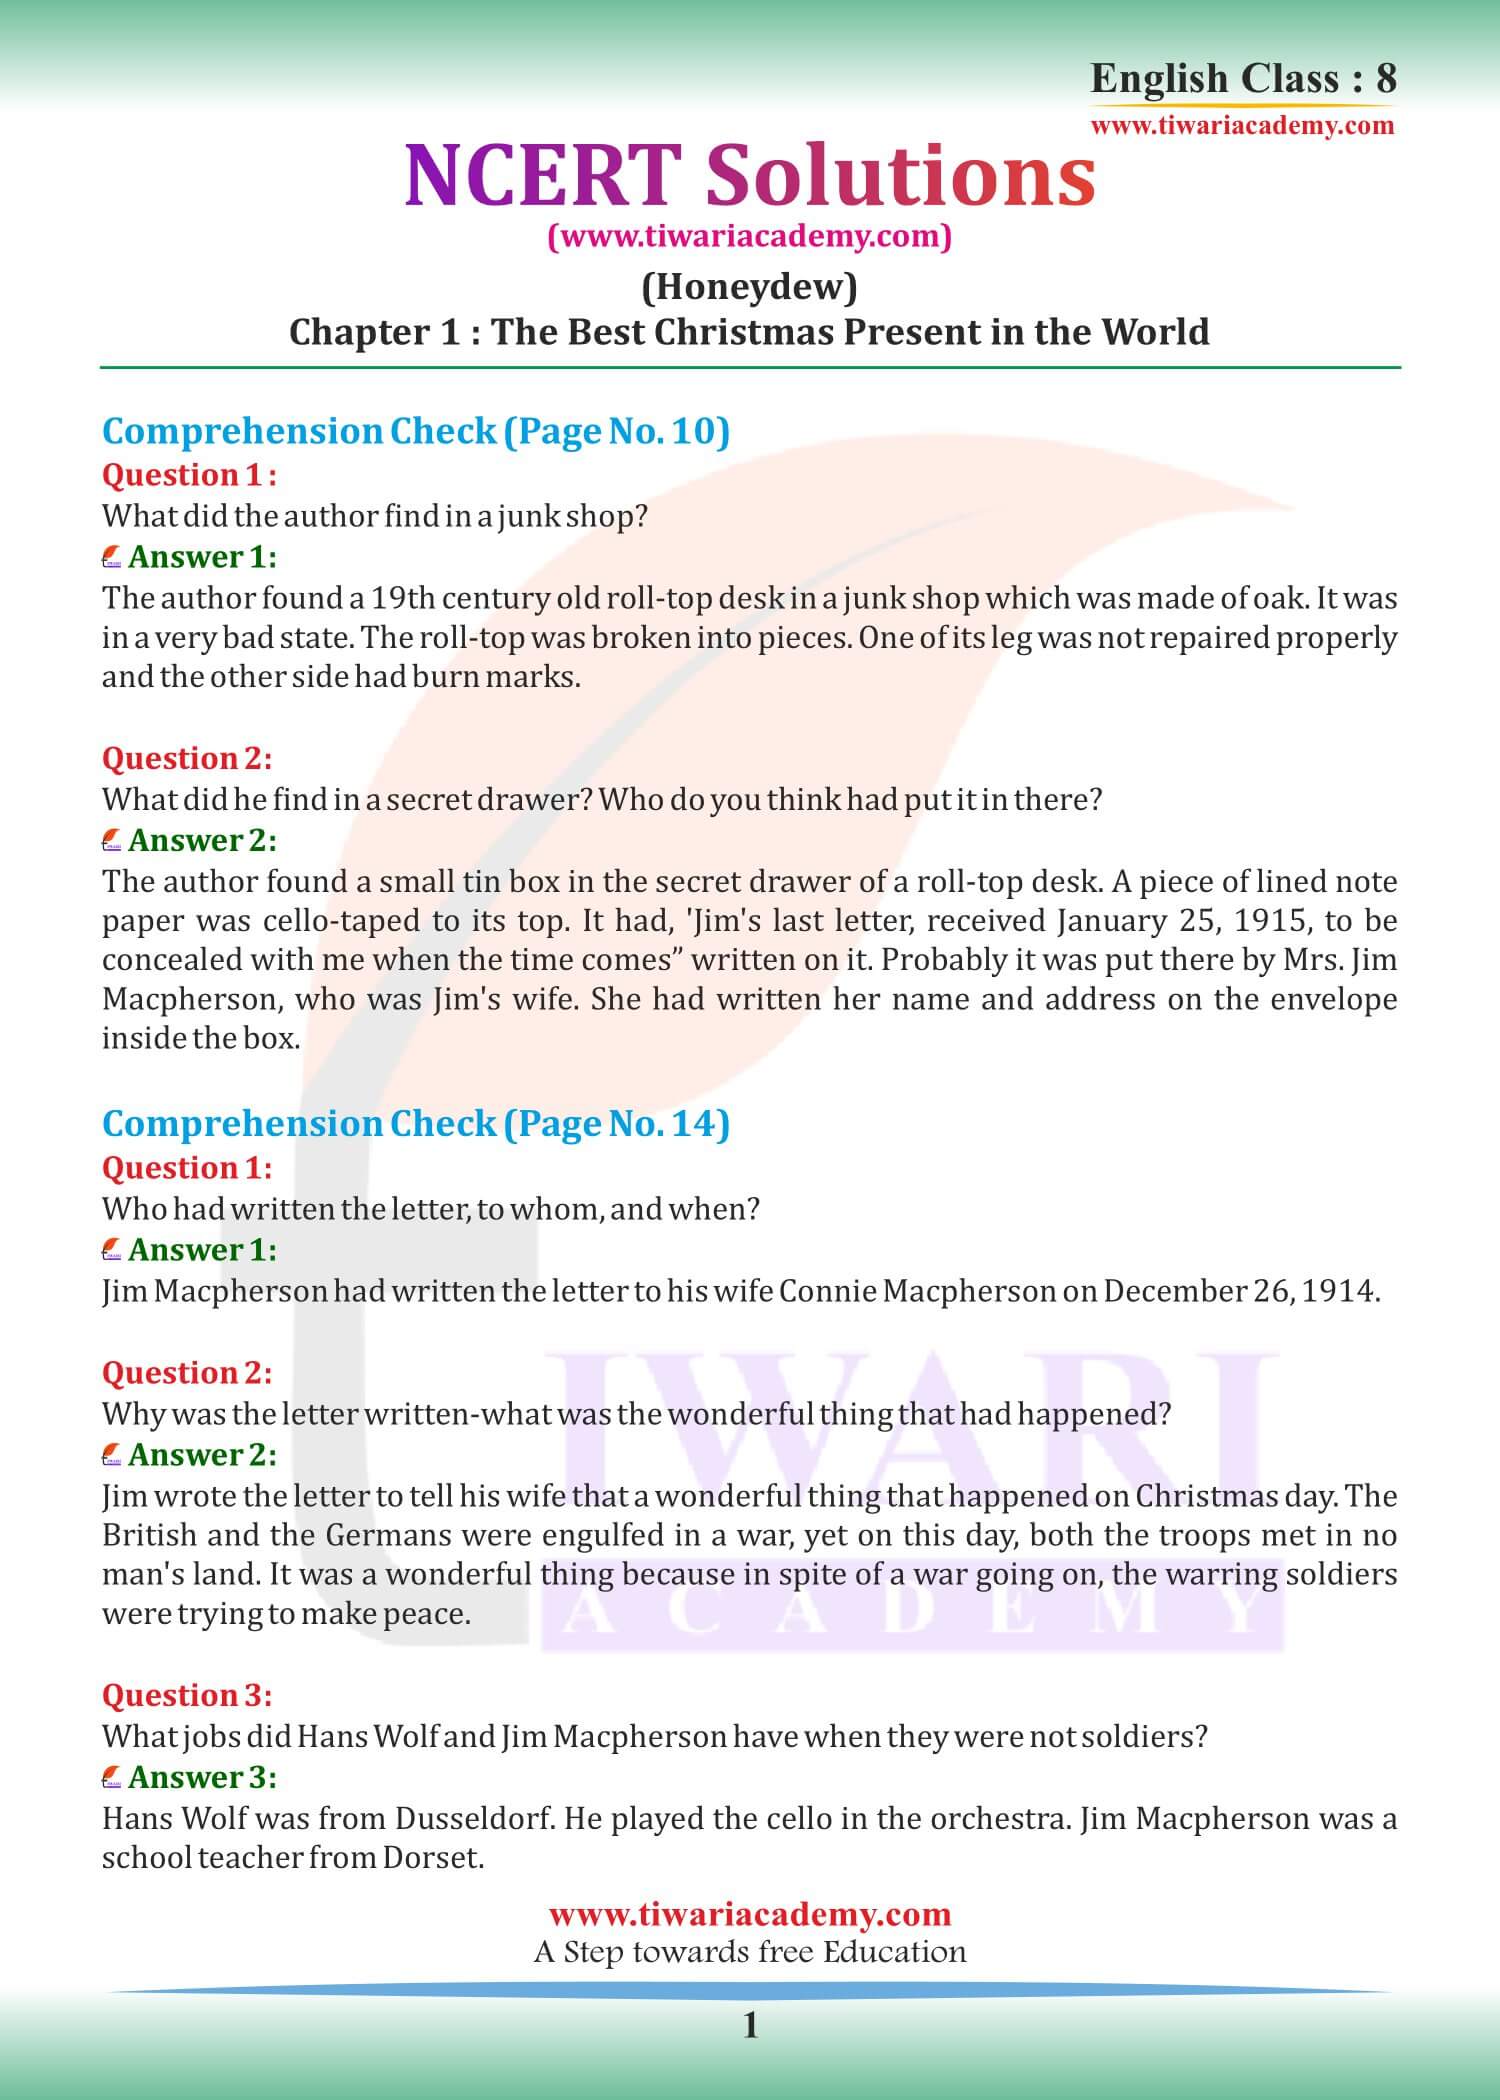 NCERT Solutions for Class 8 English Honeydew Chapter 1 The Best Christmas Present in the World